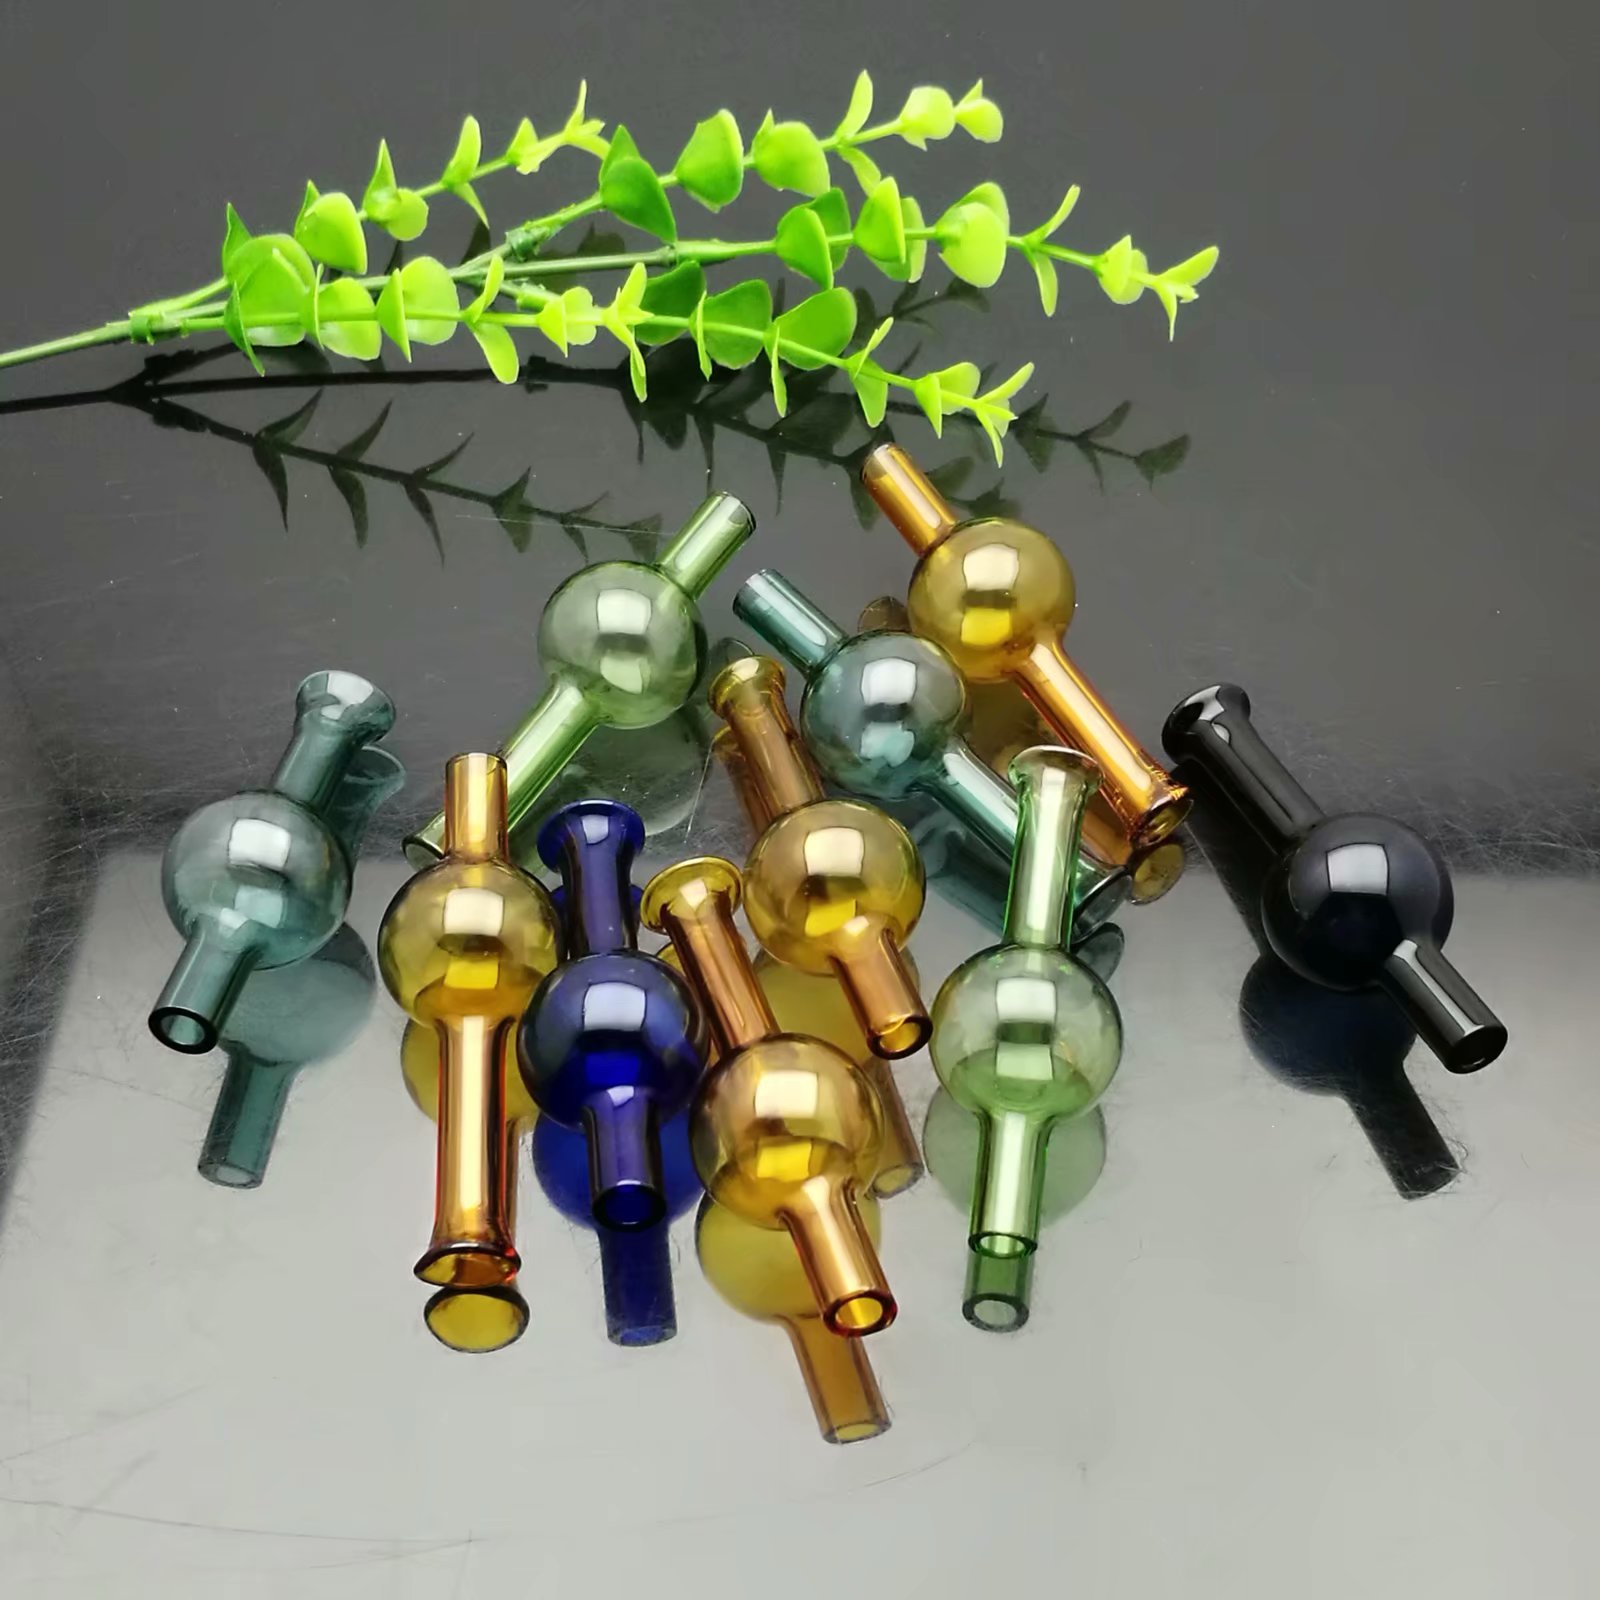 Glass Pipes Smoking Manufacture Hand-blown hookah C: Users Administrator Documents 1=740 accessories 606. Bell mouth glass with ball suction nozzle